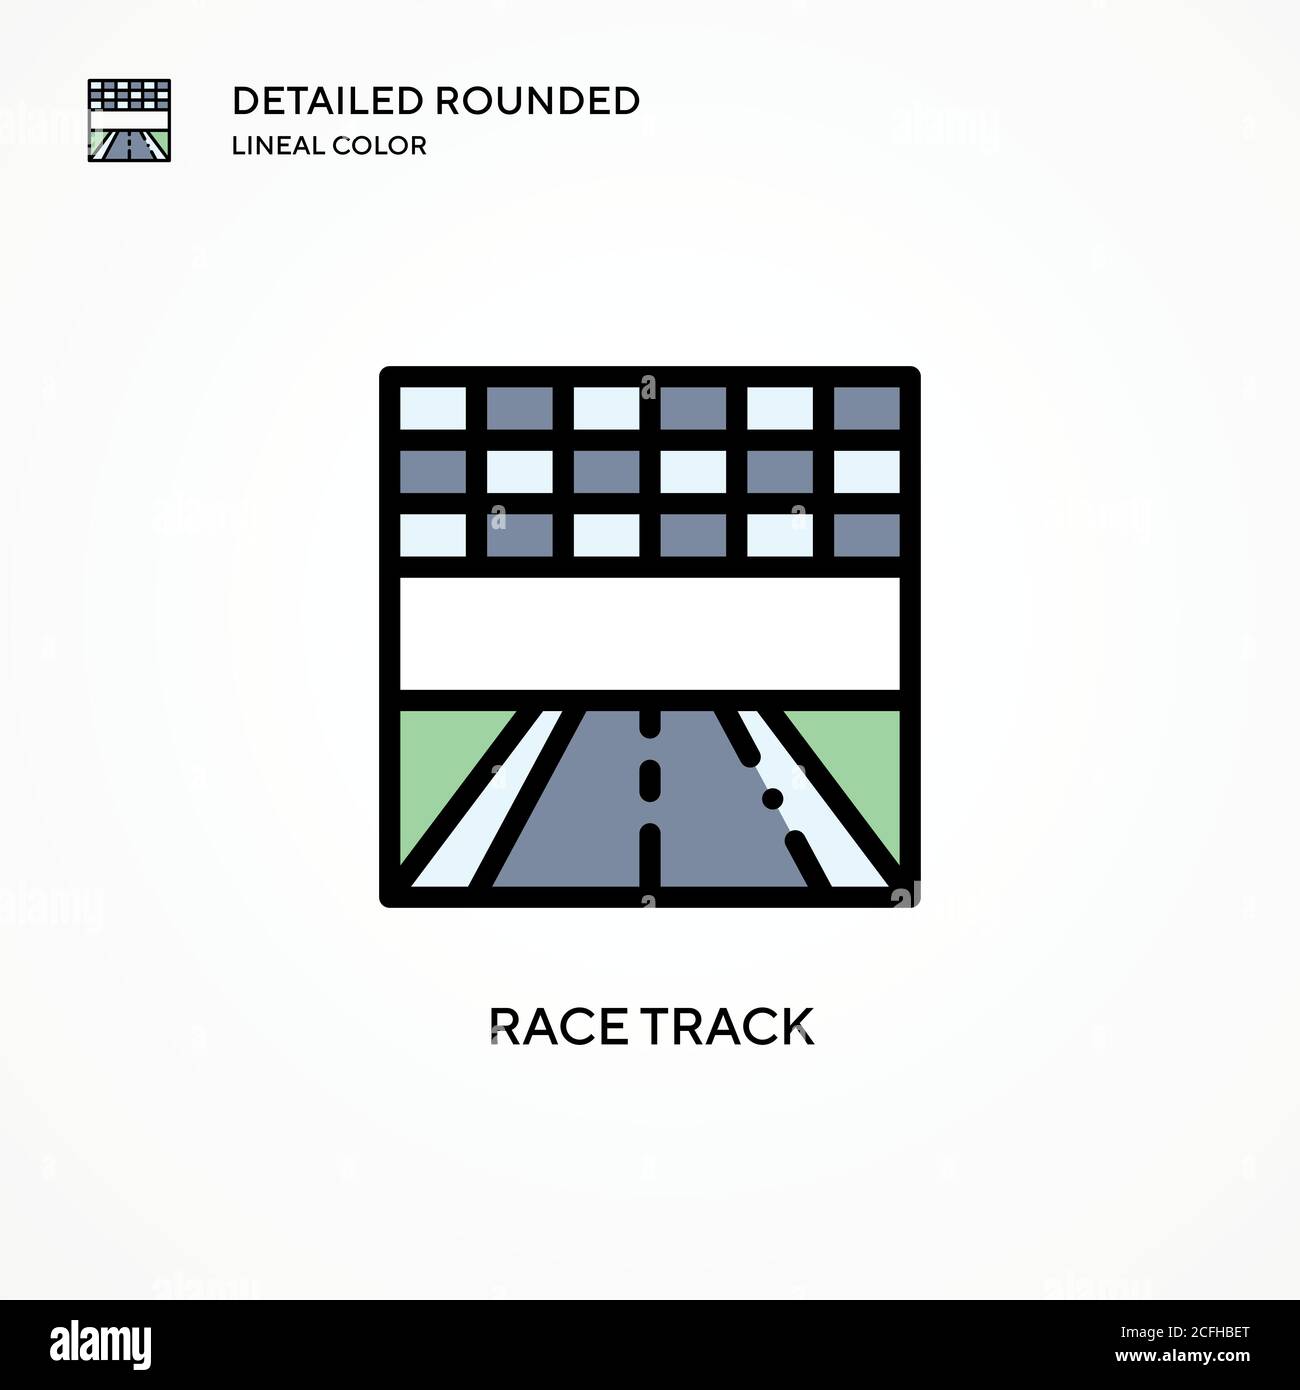 Race track vector icon. Modern vector illustration concepts. Easy to edit and customize. Stock Vector